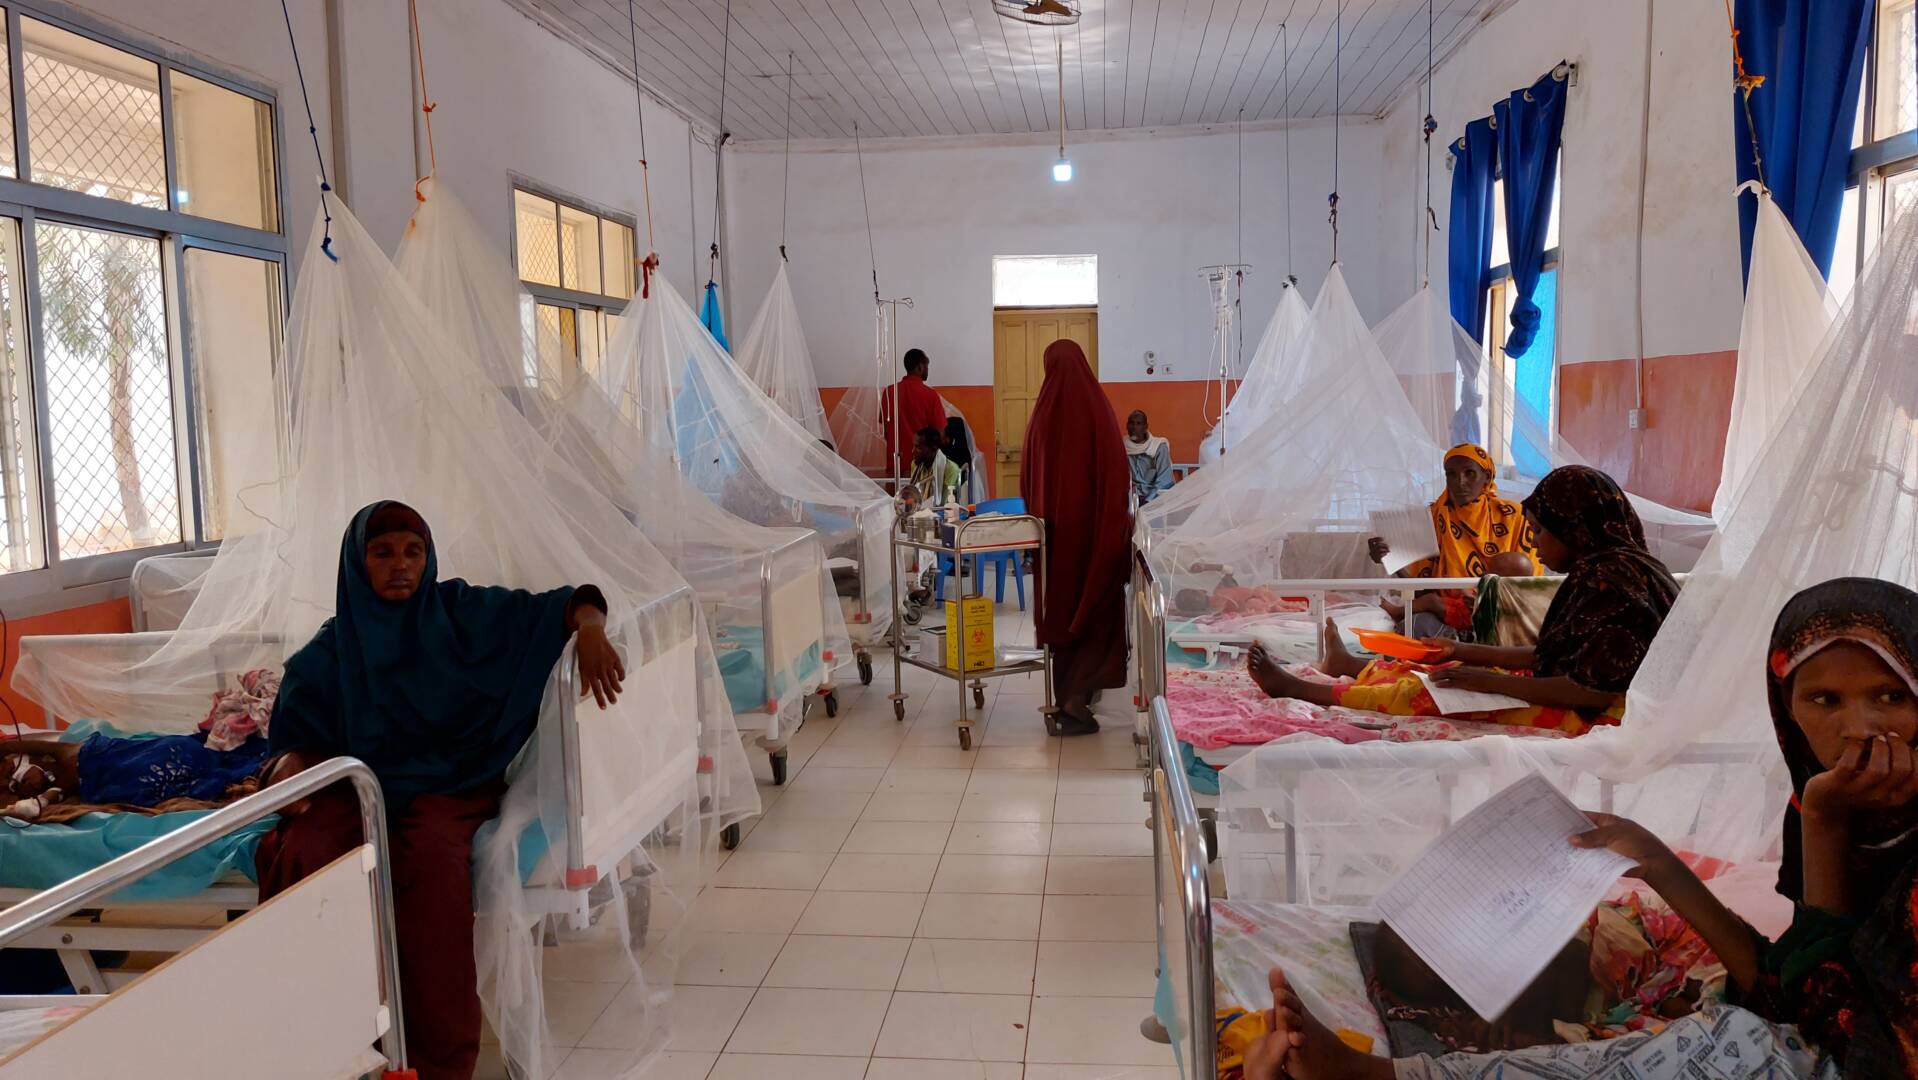 Inside a hospital in Somalia, malnourished children lie in beds, some covered by white fabric mesh tents.